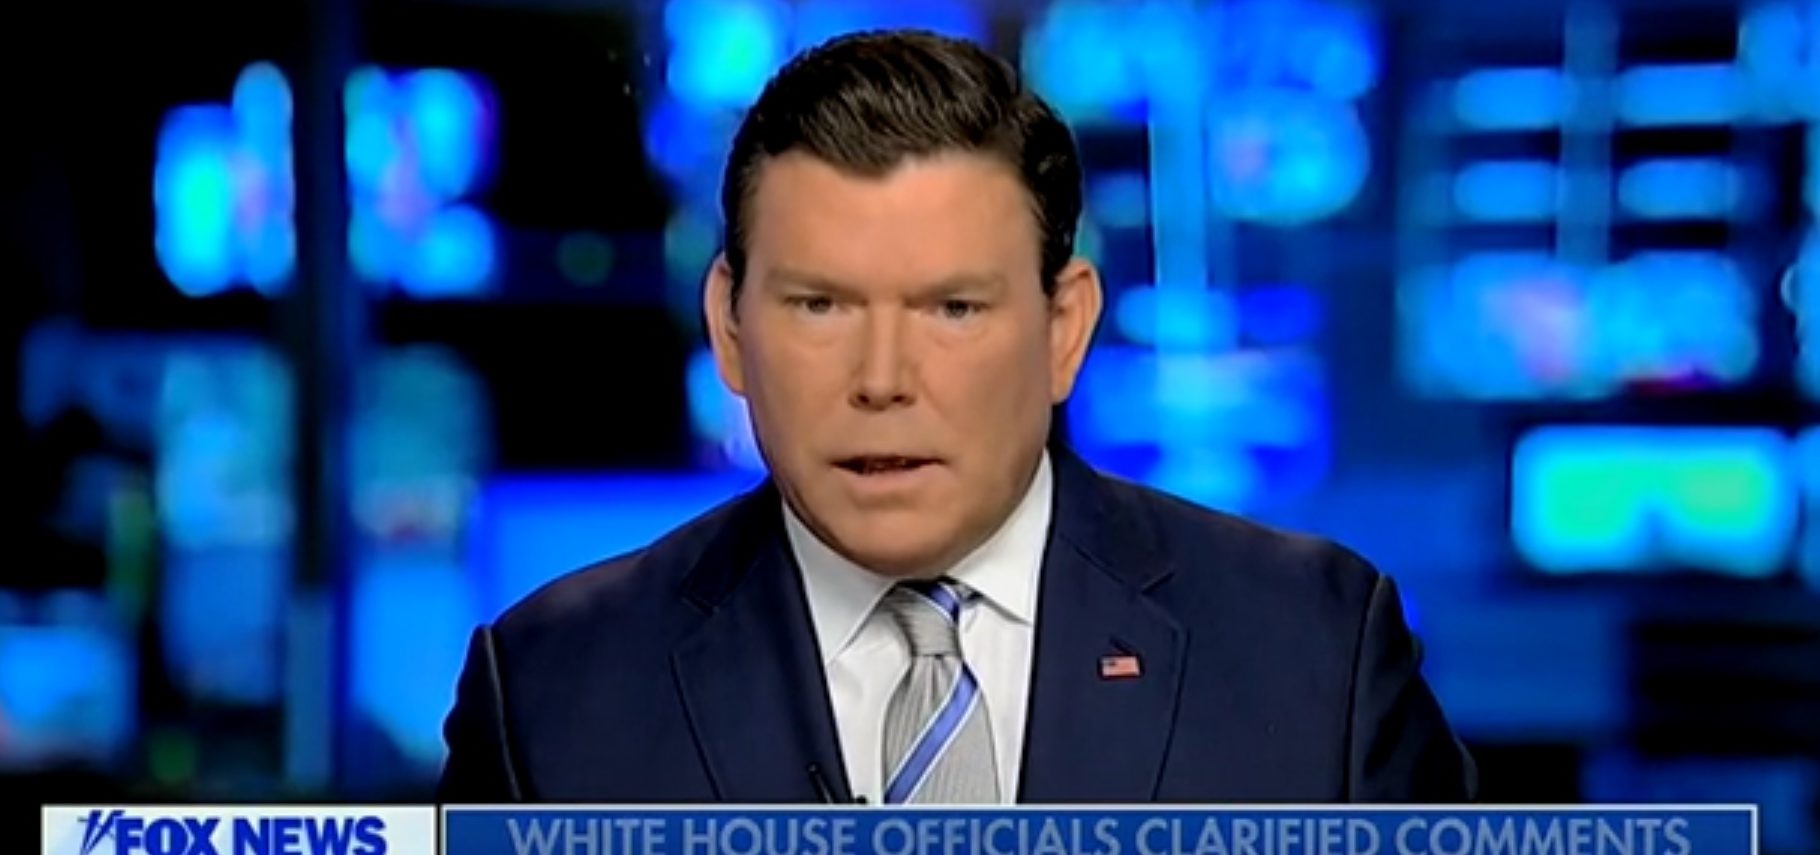 ‘Major Cleanup On Aisle Four’: Bret Baier And Chris Wallace Say Biden’s Town Hall Flubs Go Beyond ‘Gaffes’